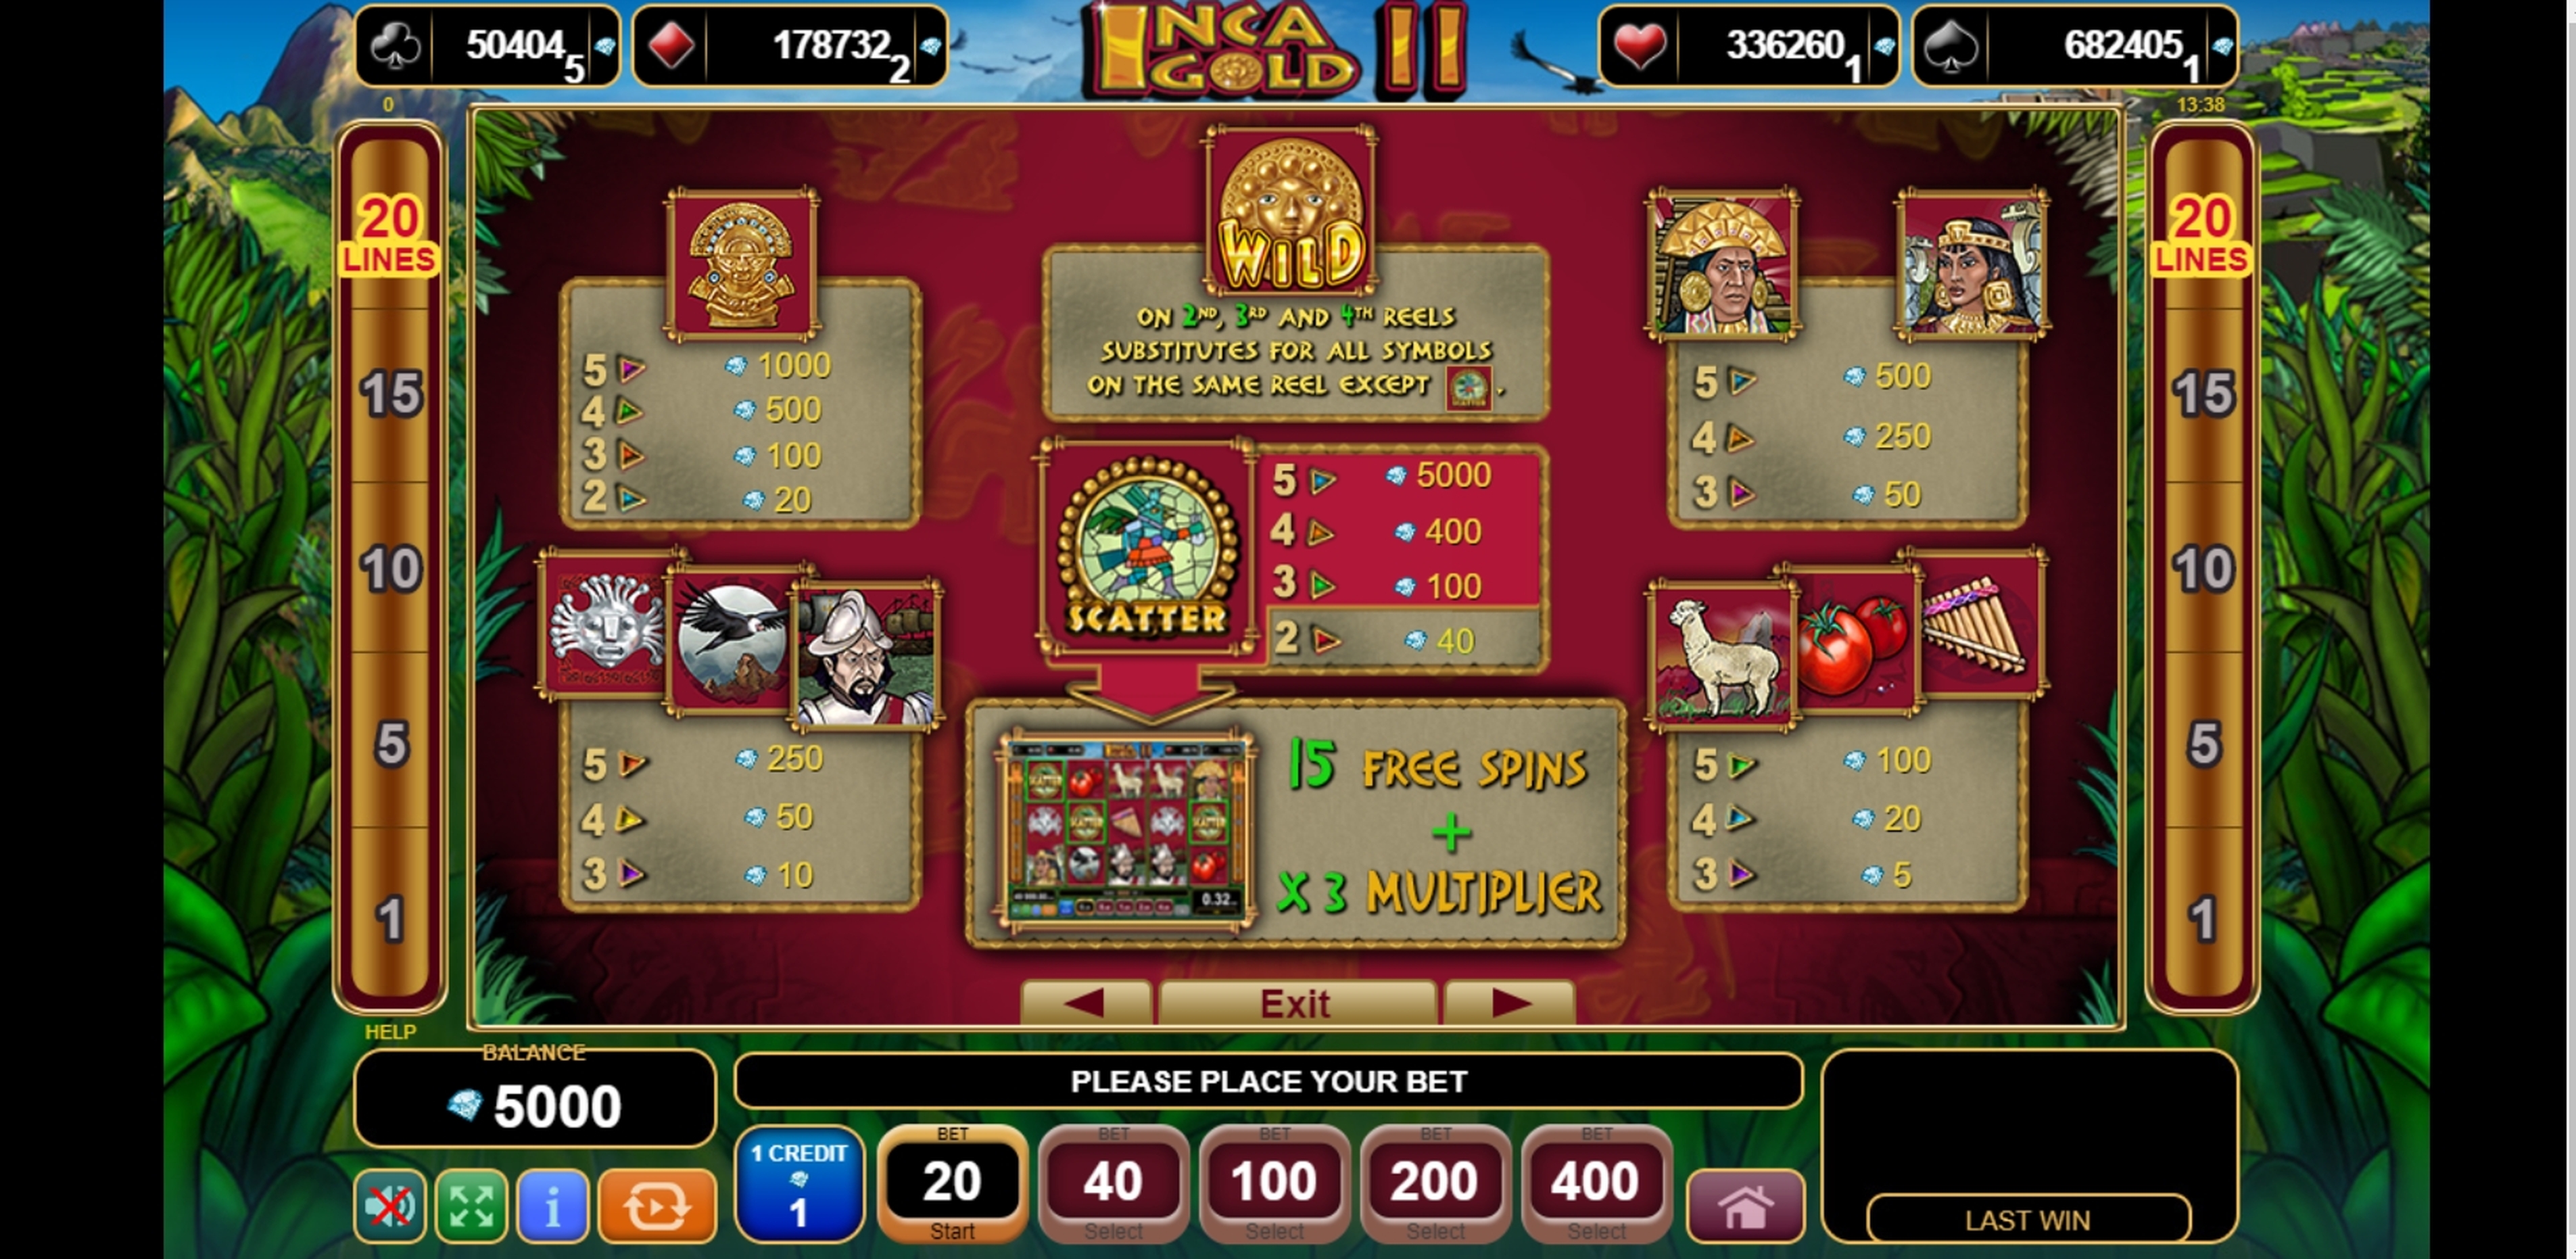 Info of Inca Gold II Slot Game by EGT